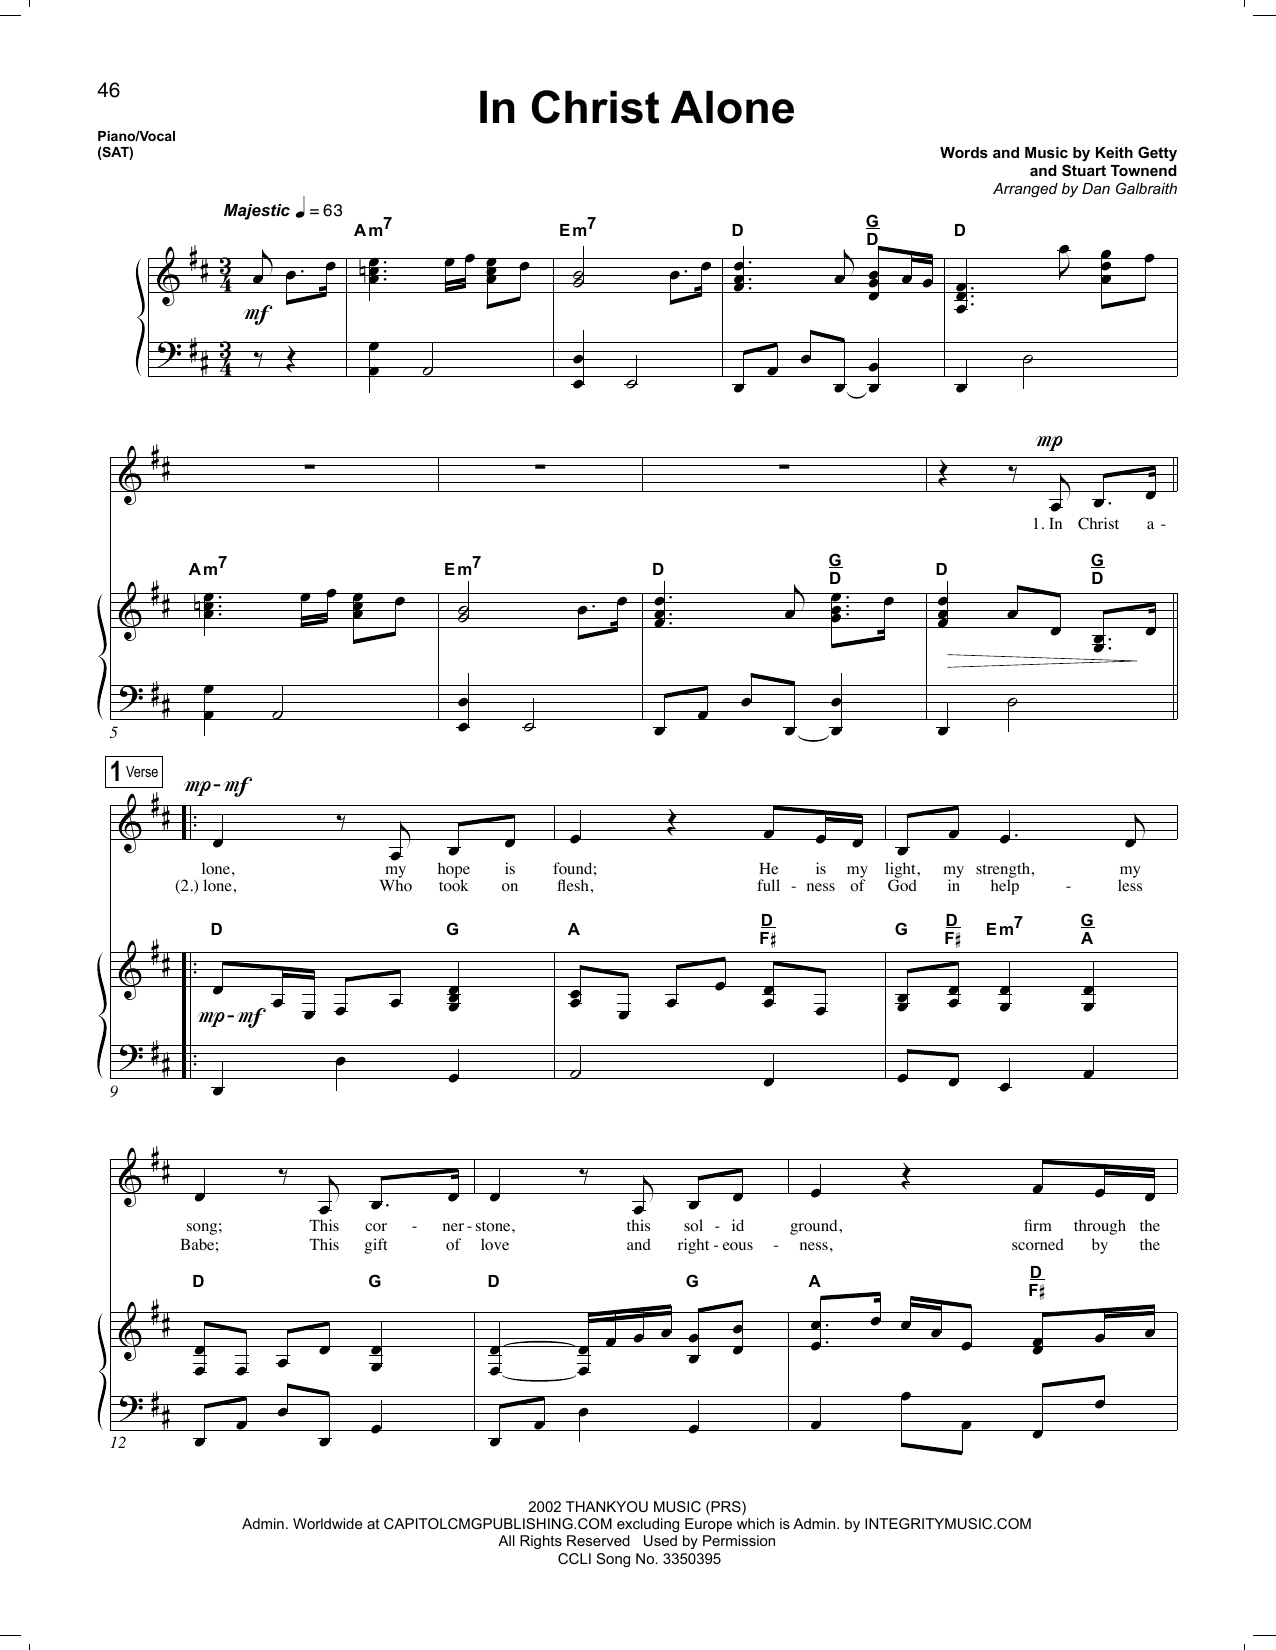 in christ alone piano sheet music free download